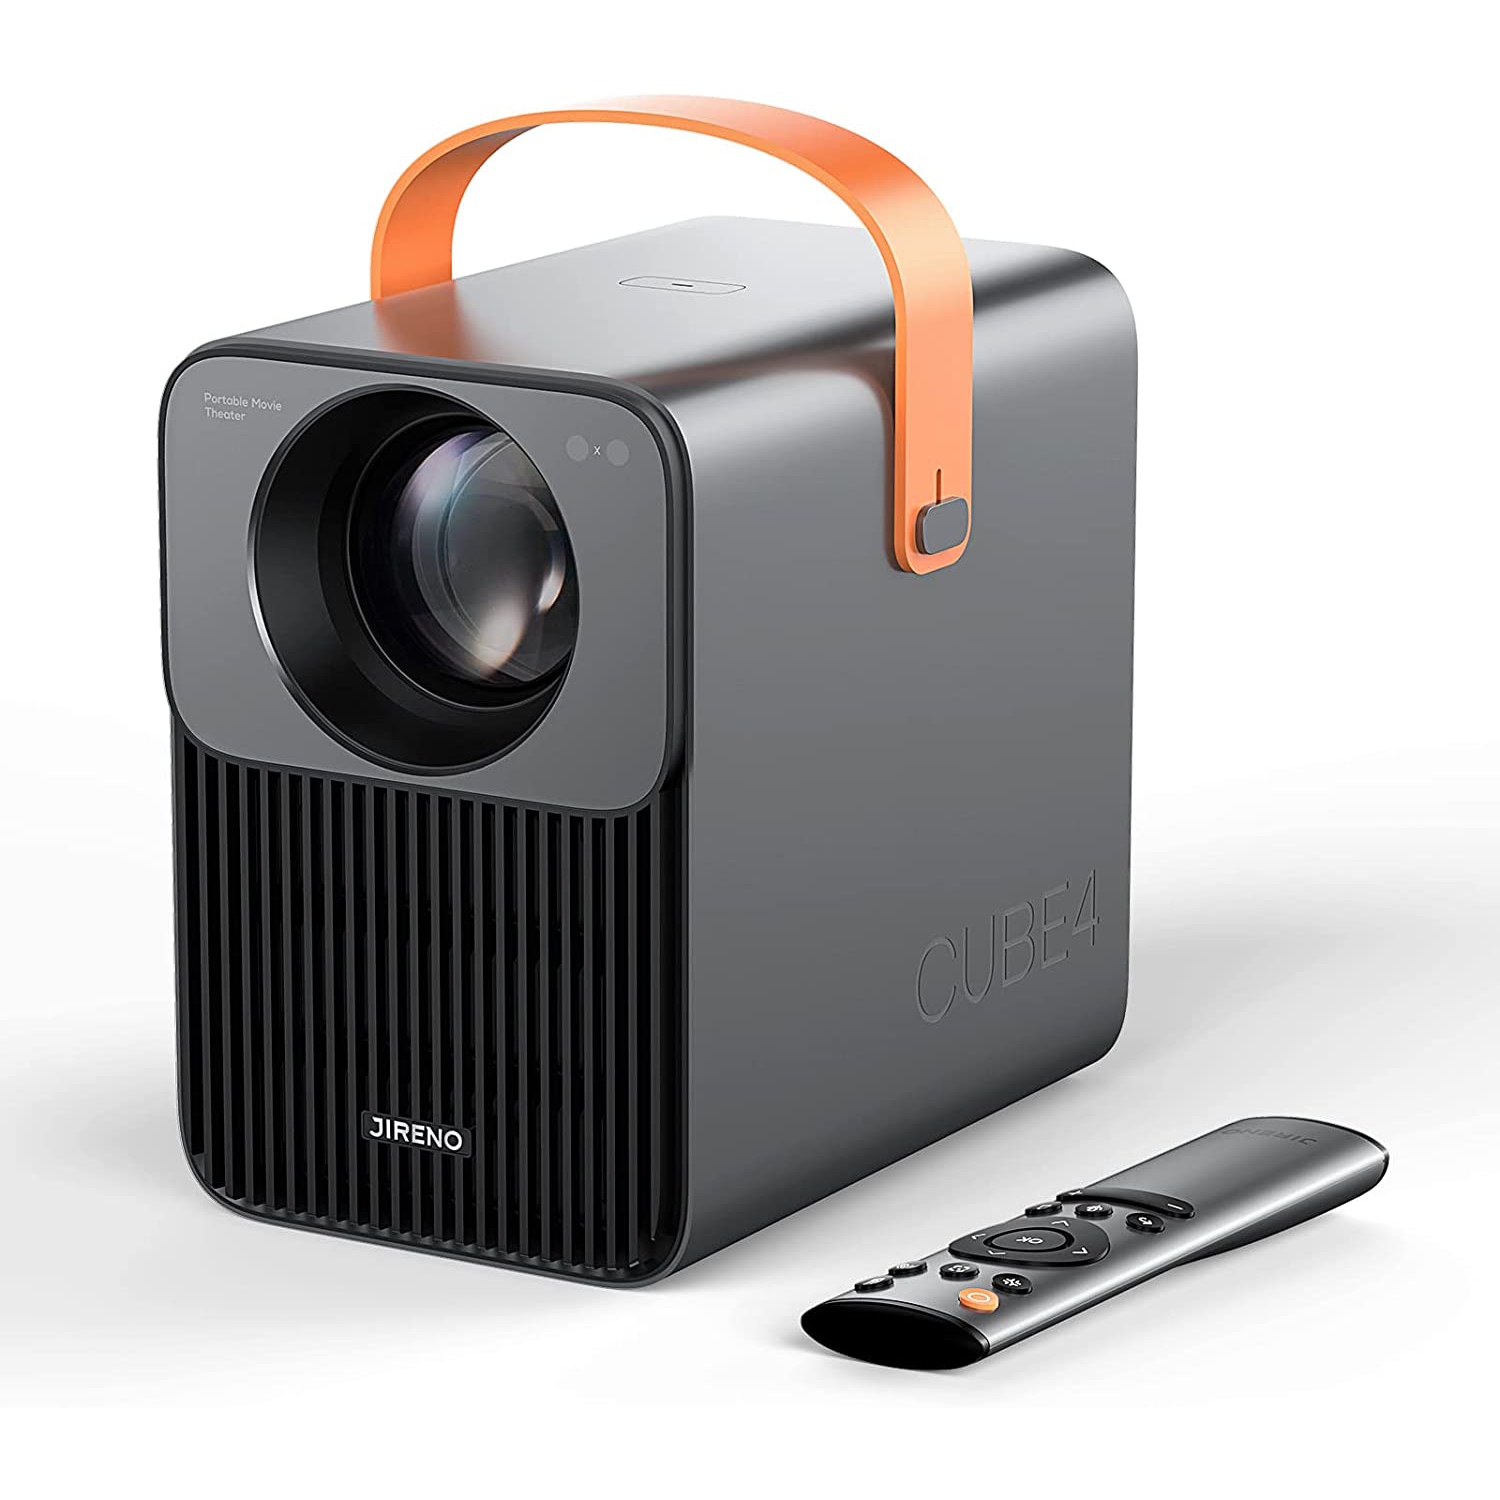 Open Box - Jireno Projector 500ANSI Lumens, 1080P Full HD, Projector with WiFi and Bluetooth, Android TV 9.0